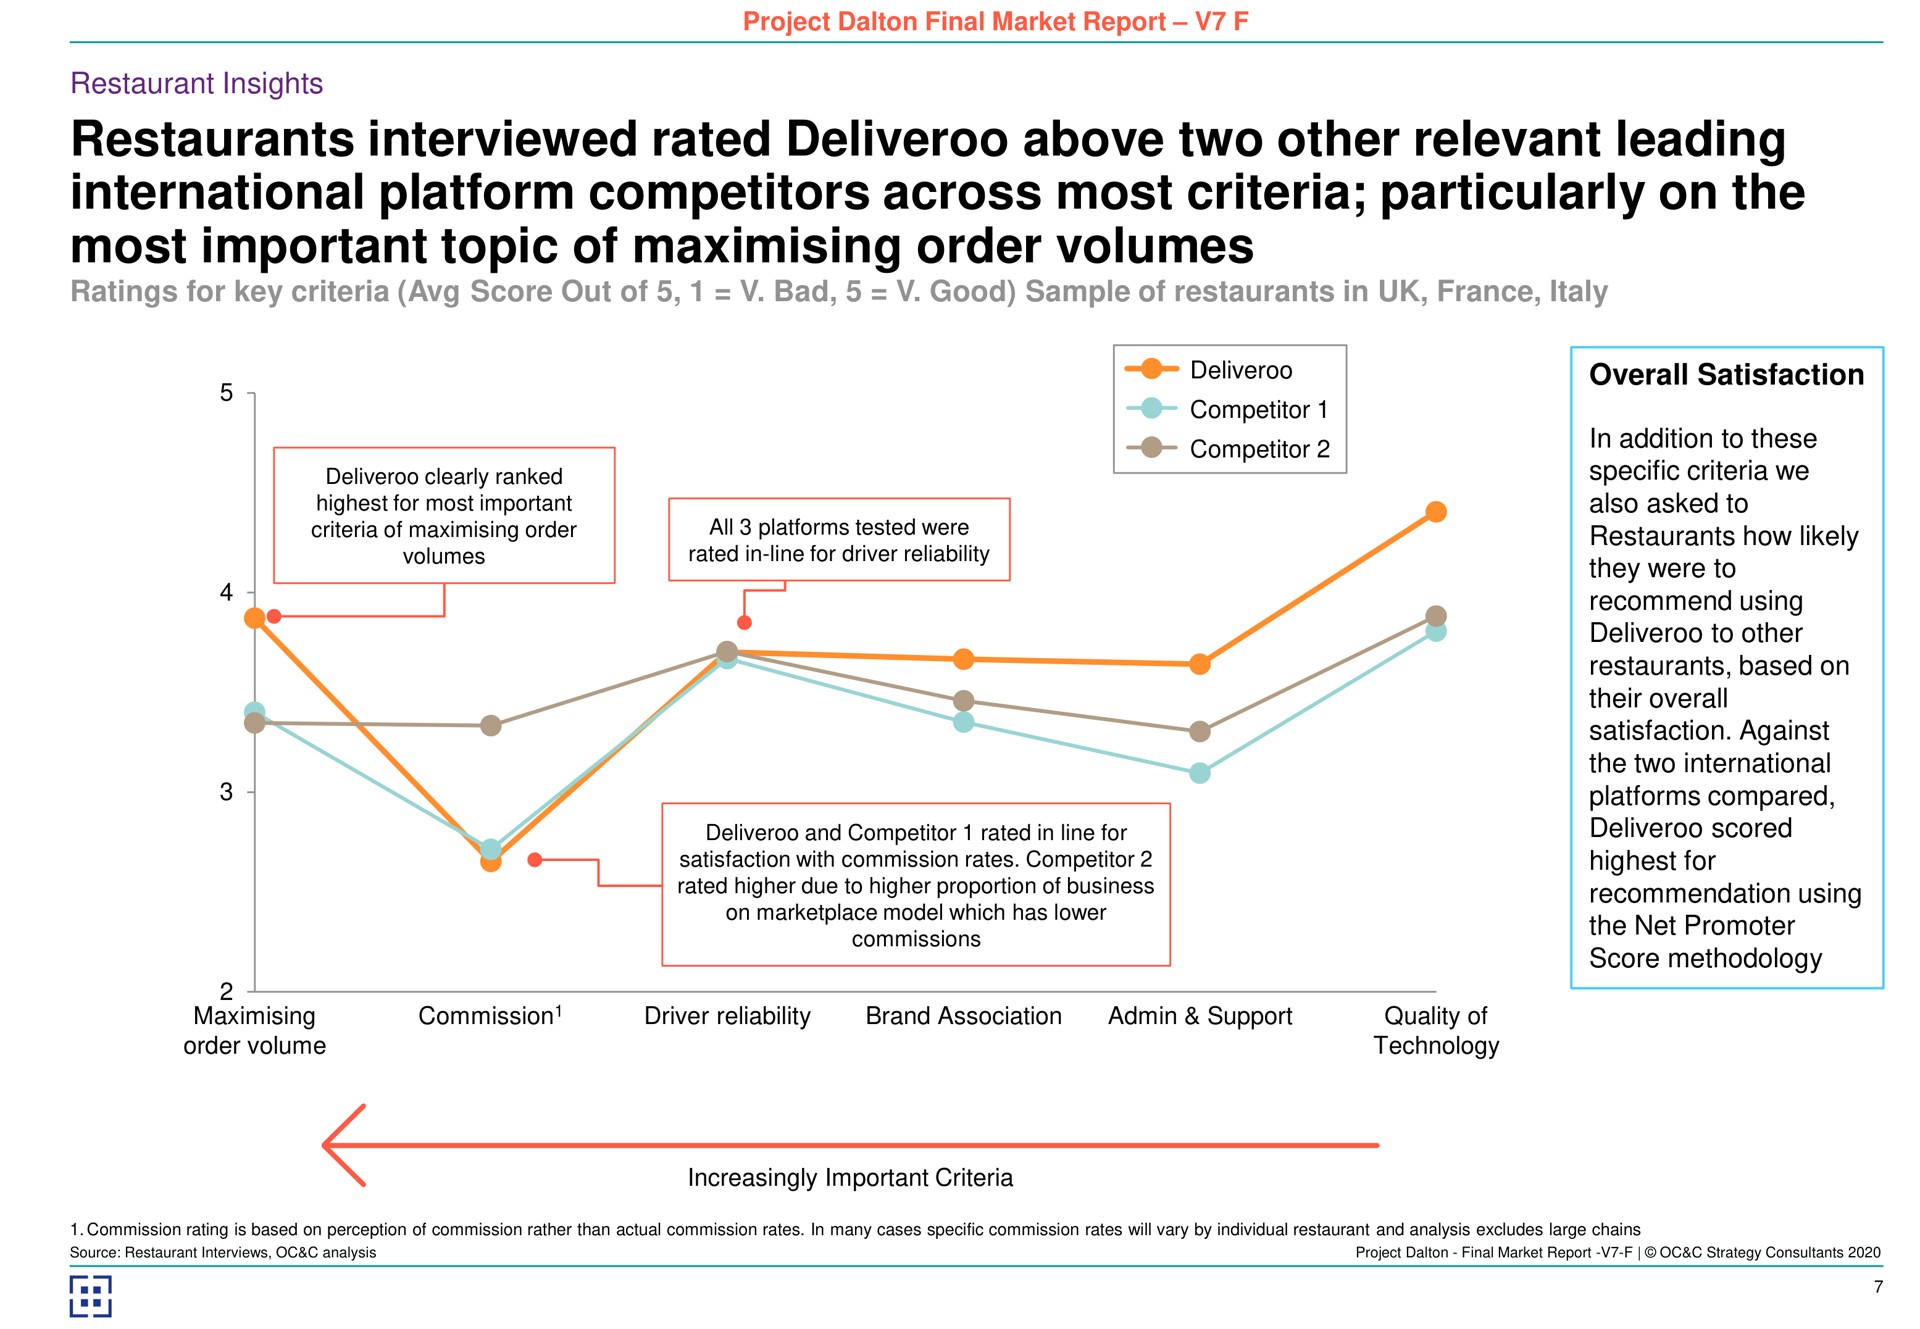 restaurants interviewed rated above two other relevant leading international platform competitors across most criteria particularly on the most important topic of order volumes | Deliveroo